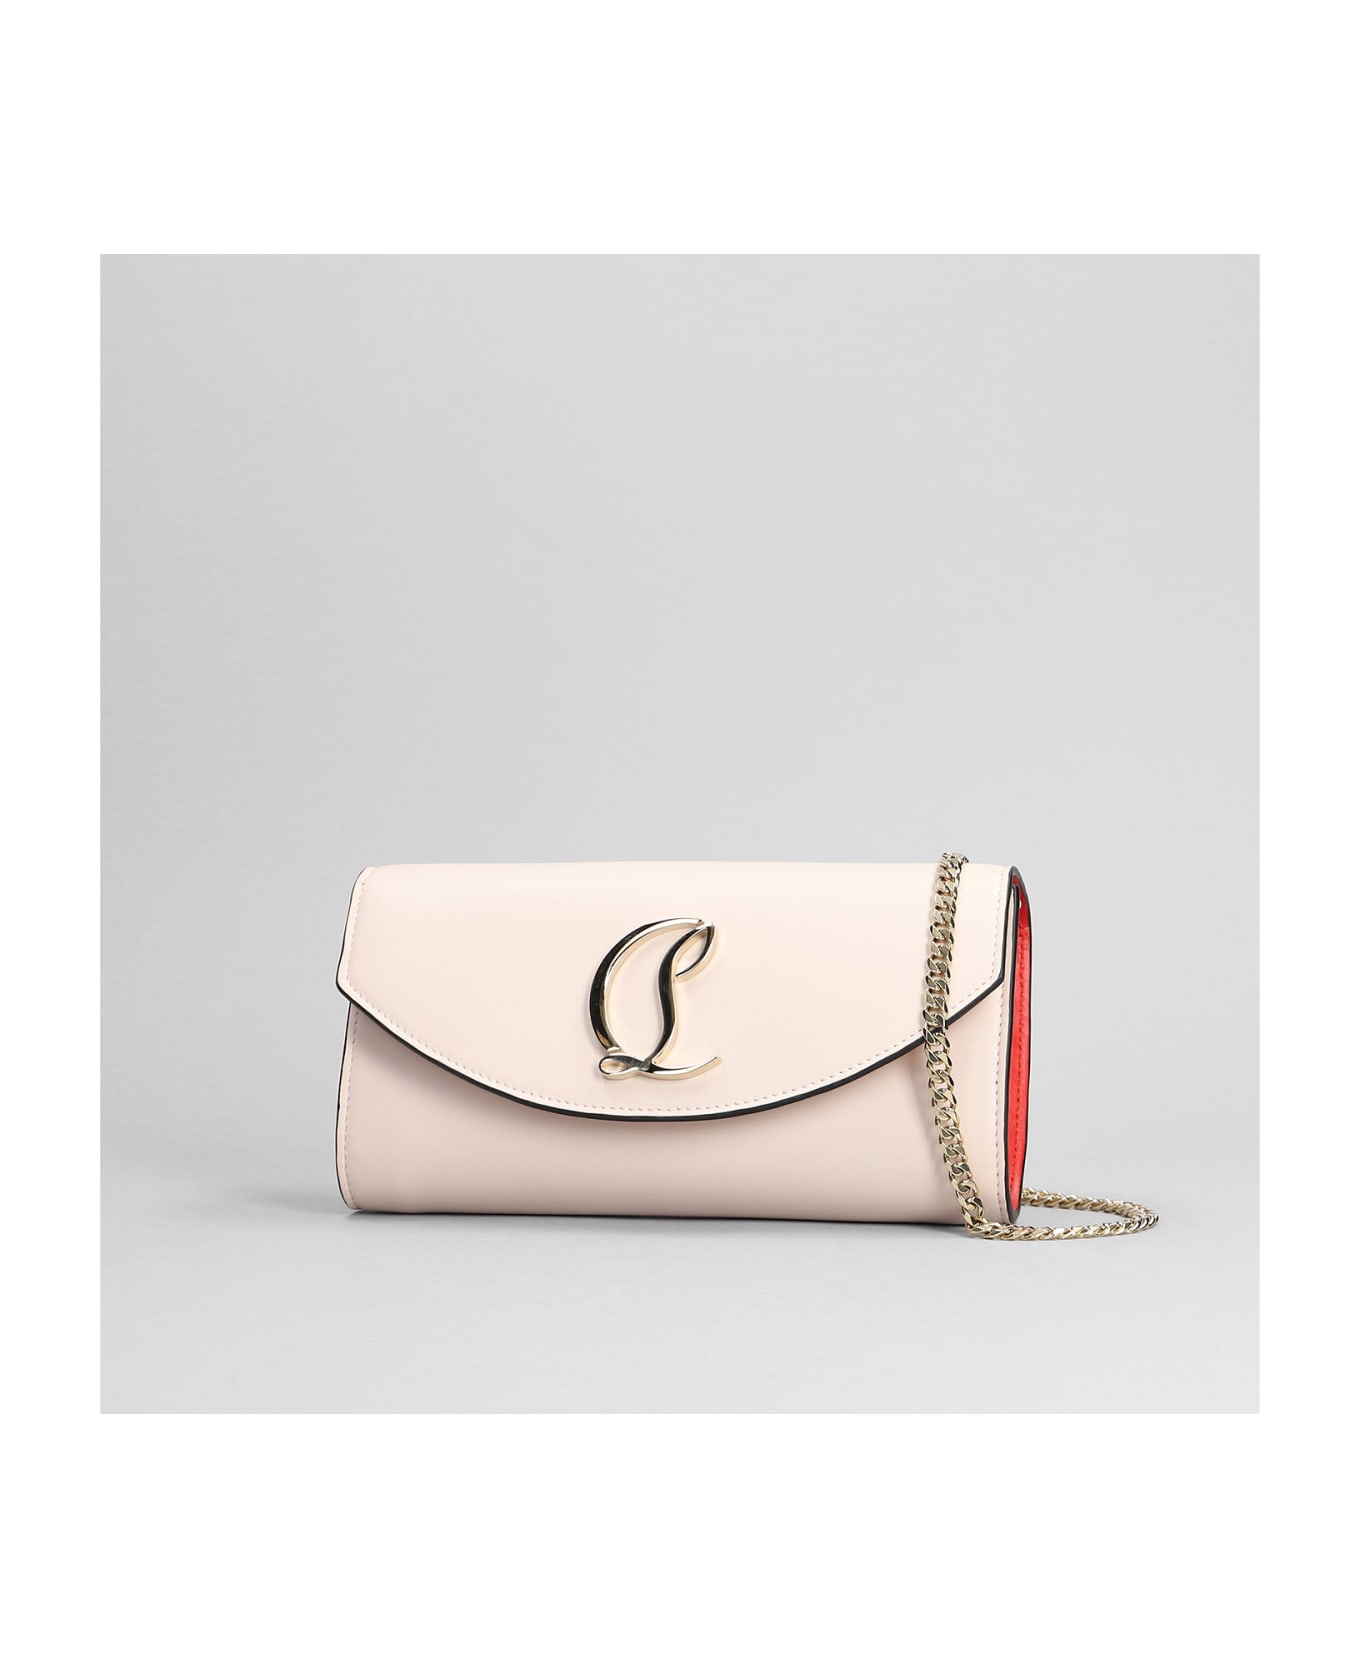 Christian Louboutin Wallet On Chain In Calf Leather - LECHE GOLD